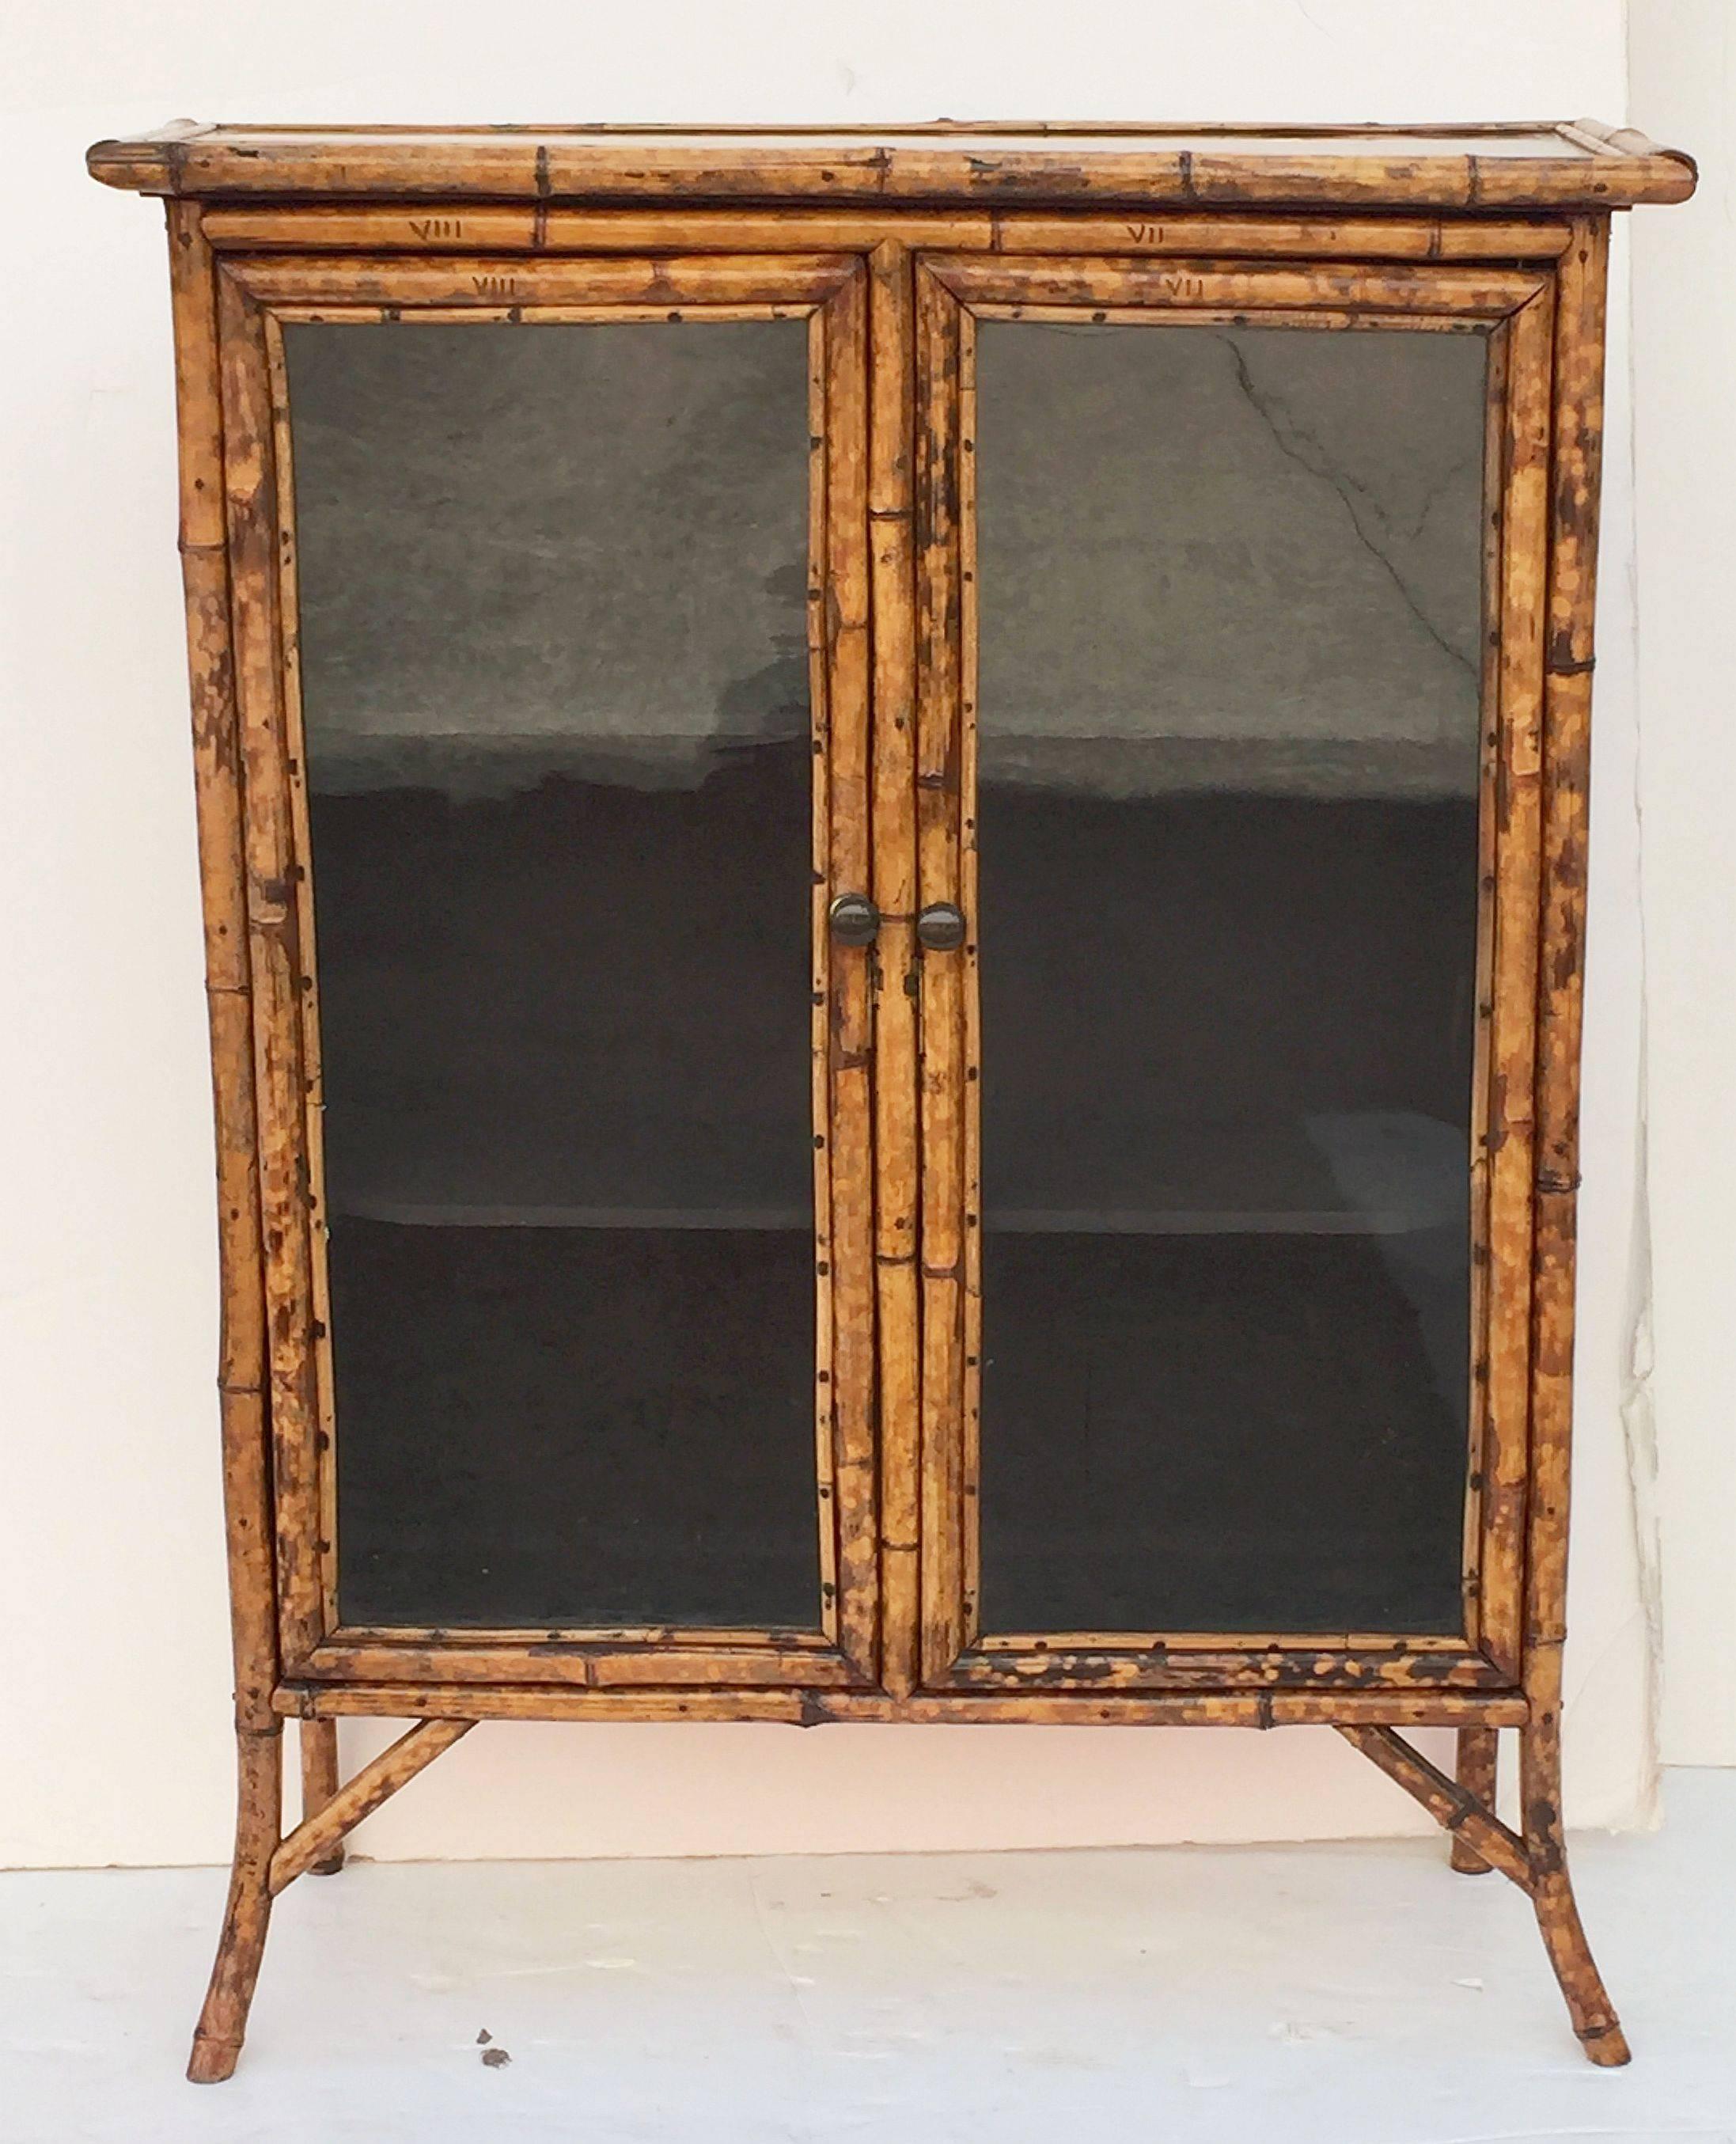 A handsome English bamboo bookcase, from the Aesthetic Movement era, featuring a japan-lacquered top with bamboo accents, over two framed-glass doors with brass hardware, opening to an interior of two shelves, each cabinet side exterior, lined with